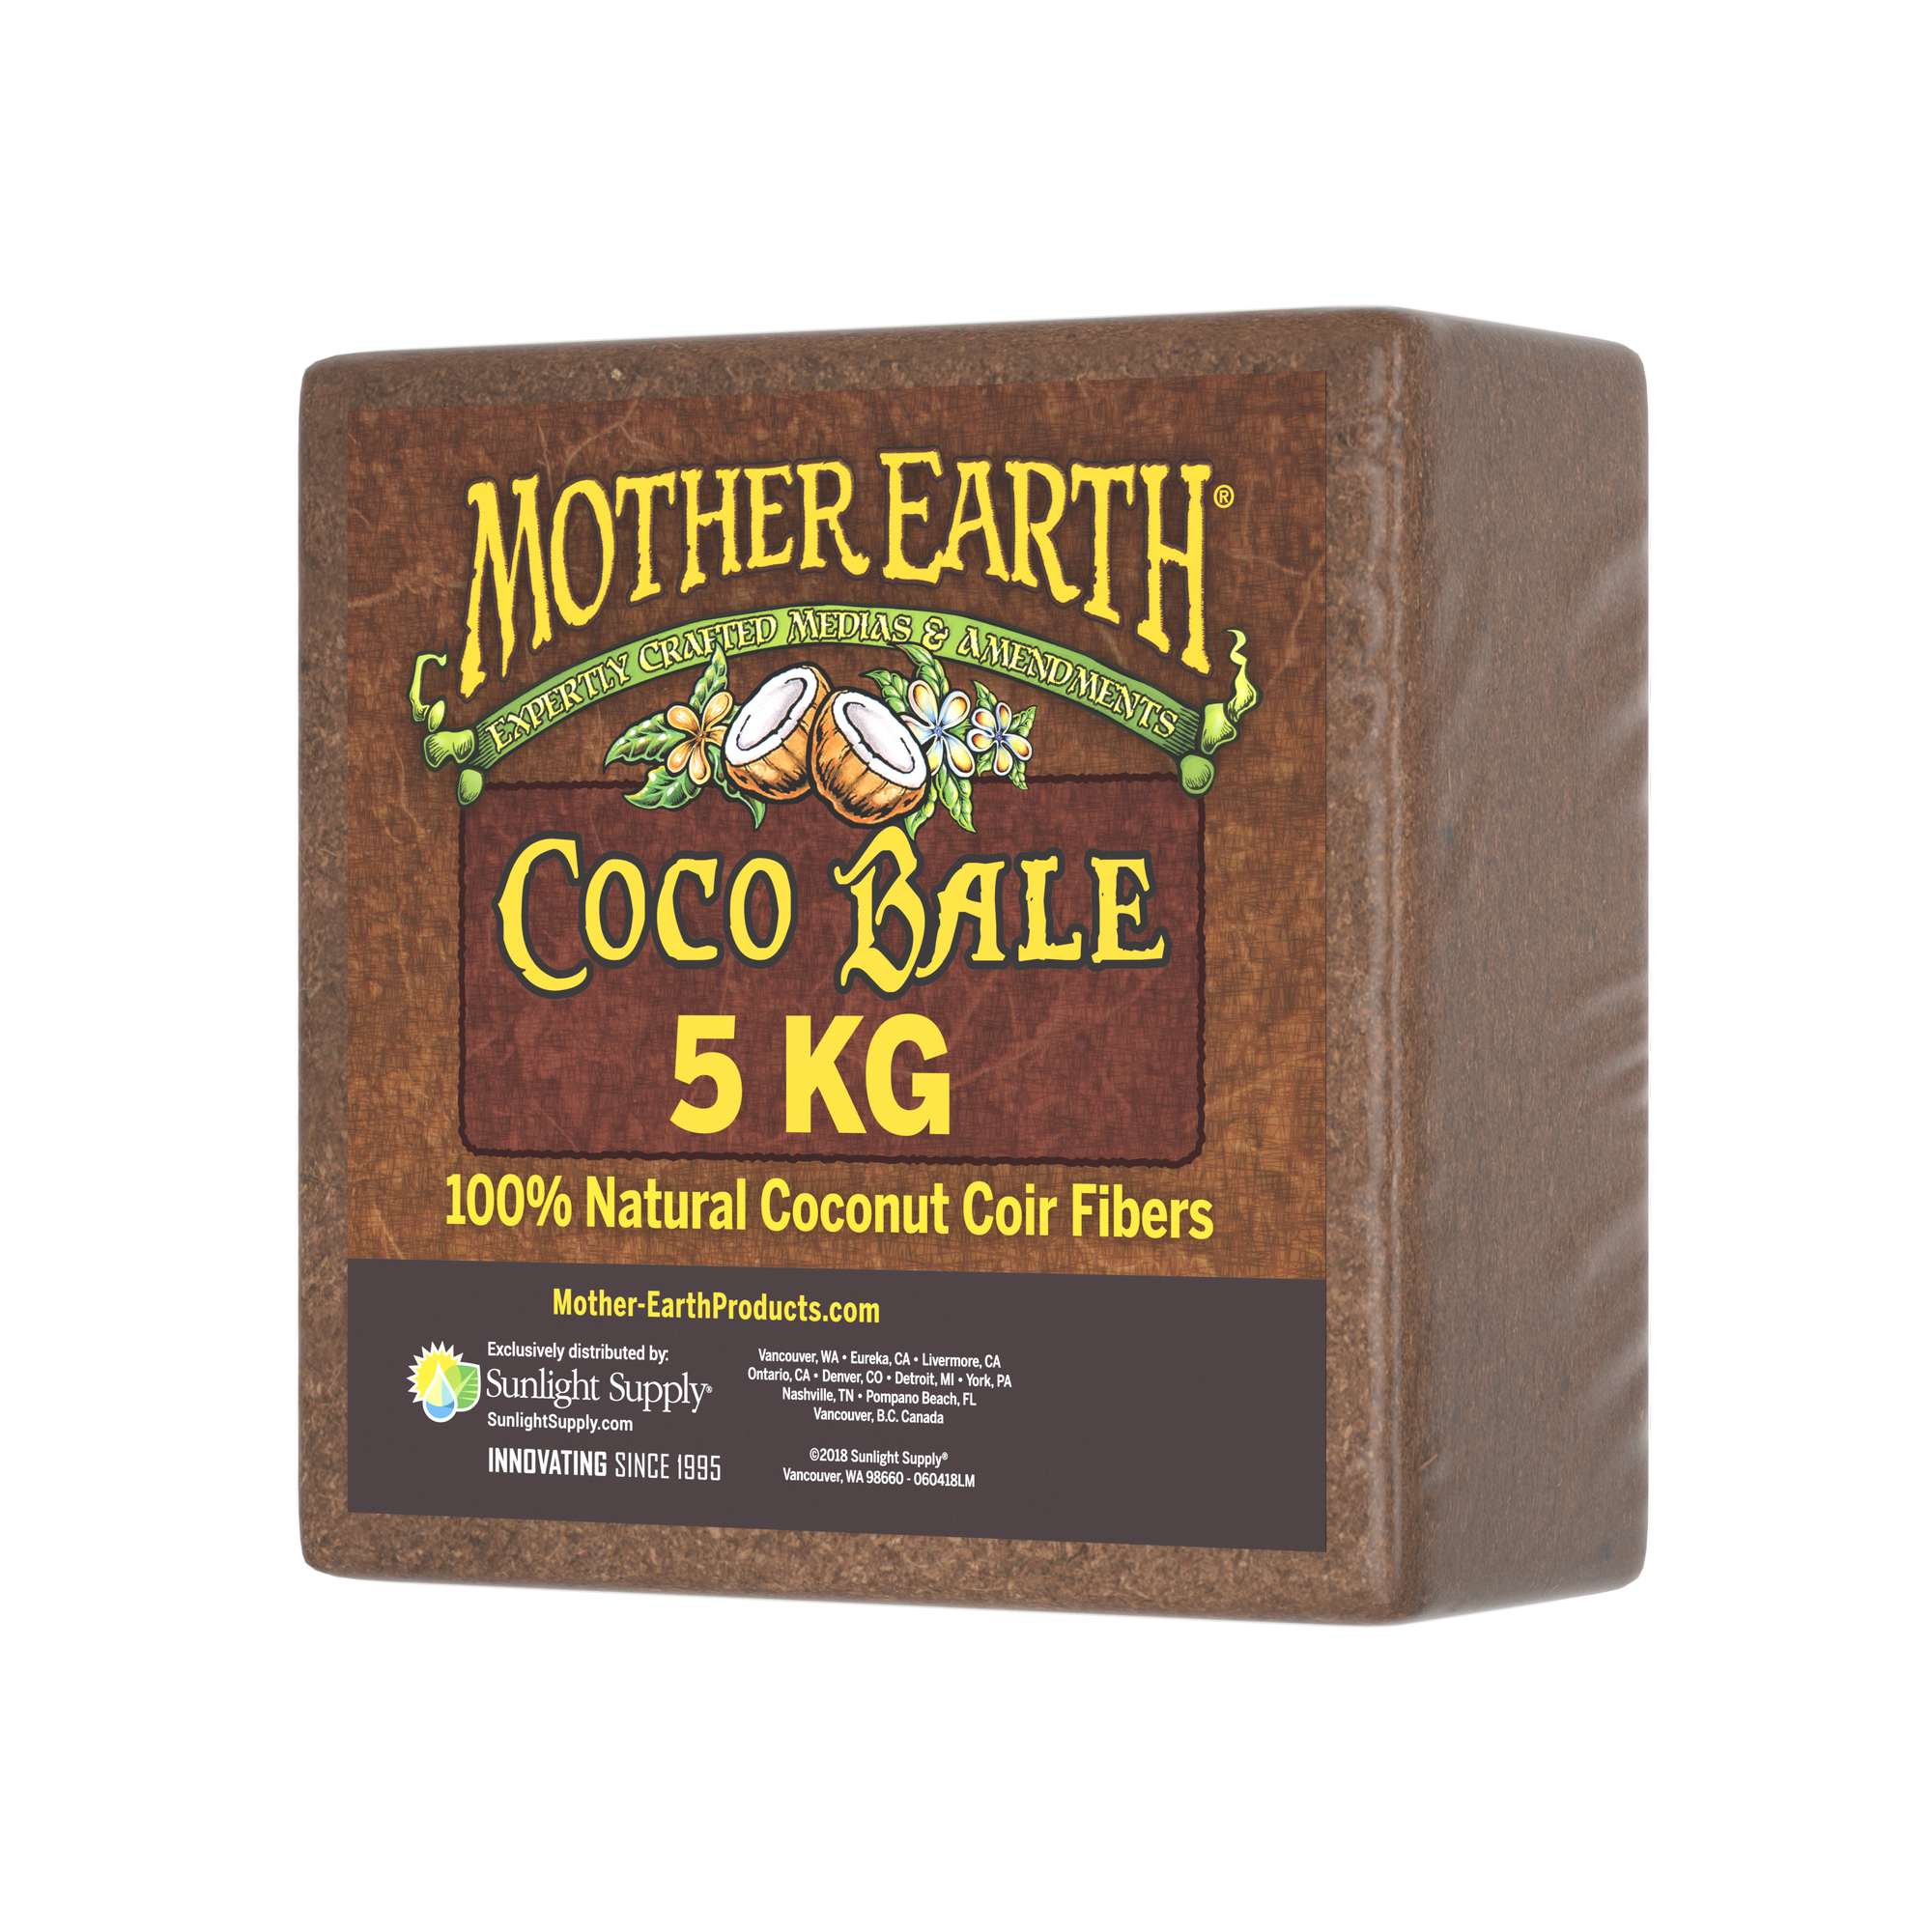 Mother Earth Coco Bale 5 kg, 100% Coconut Coir Fibers - image 5 of 8